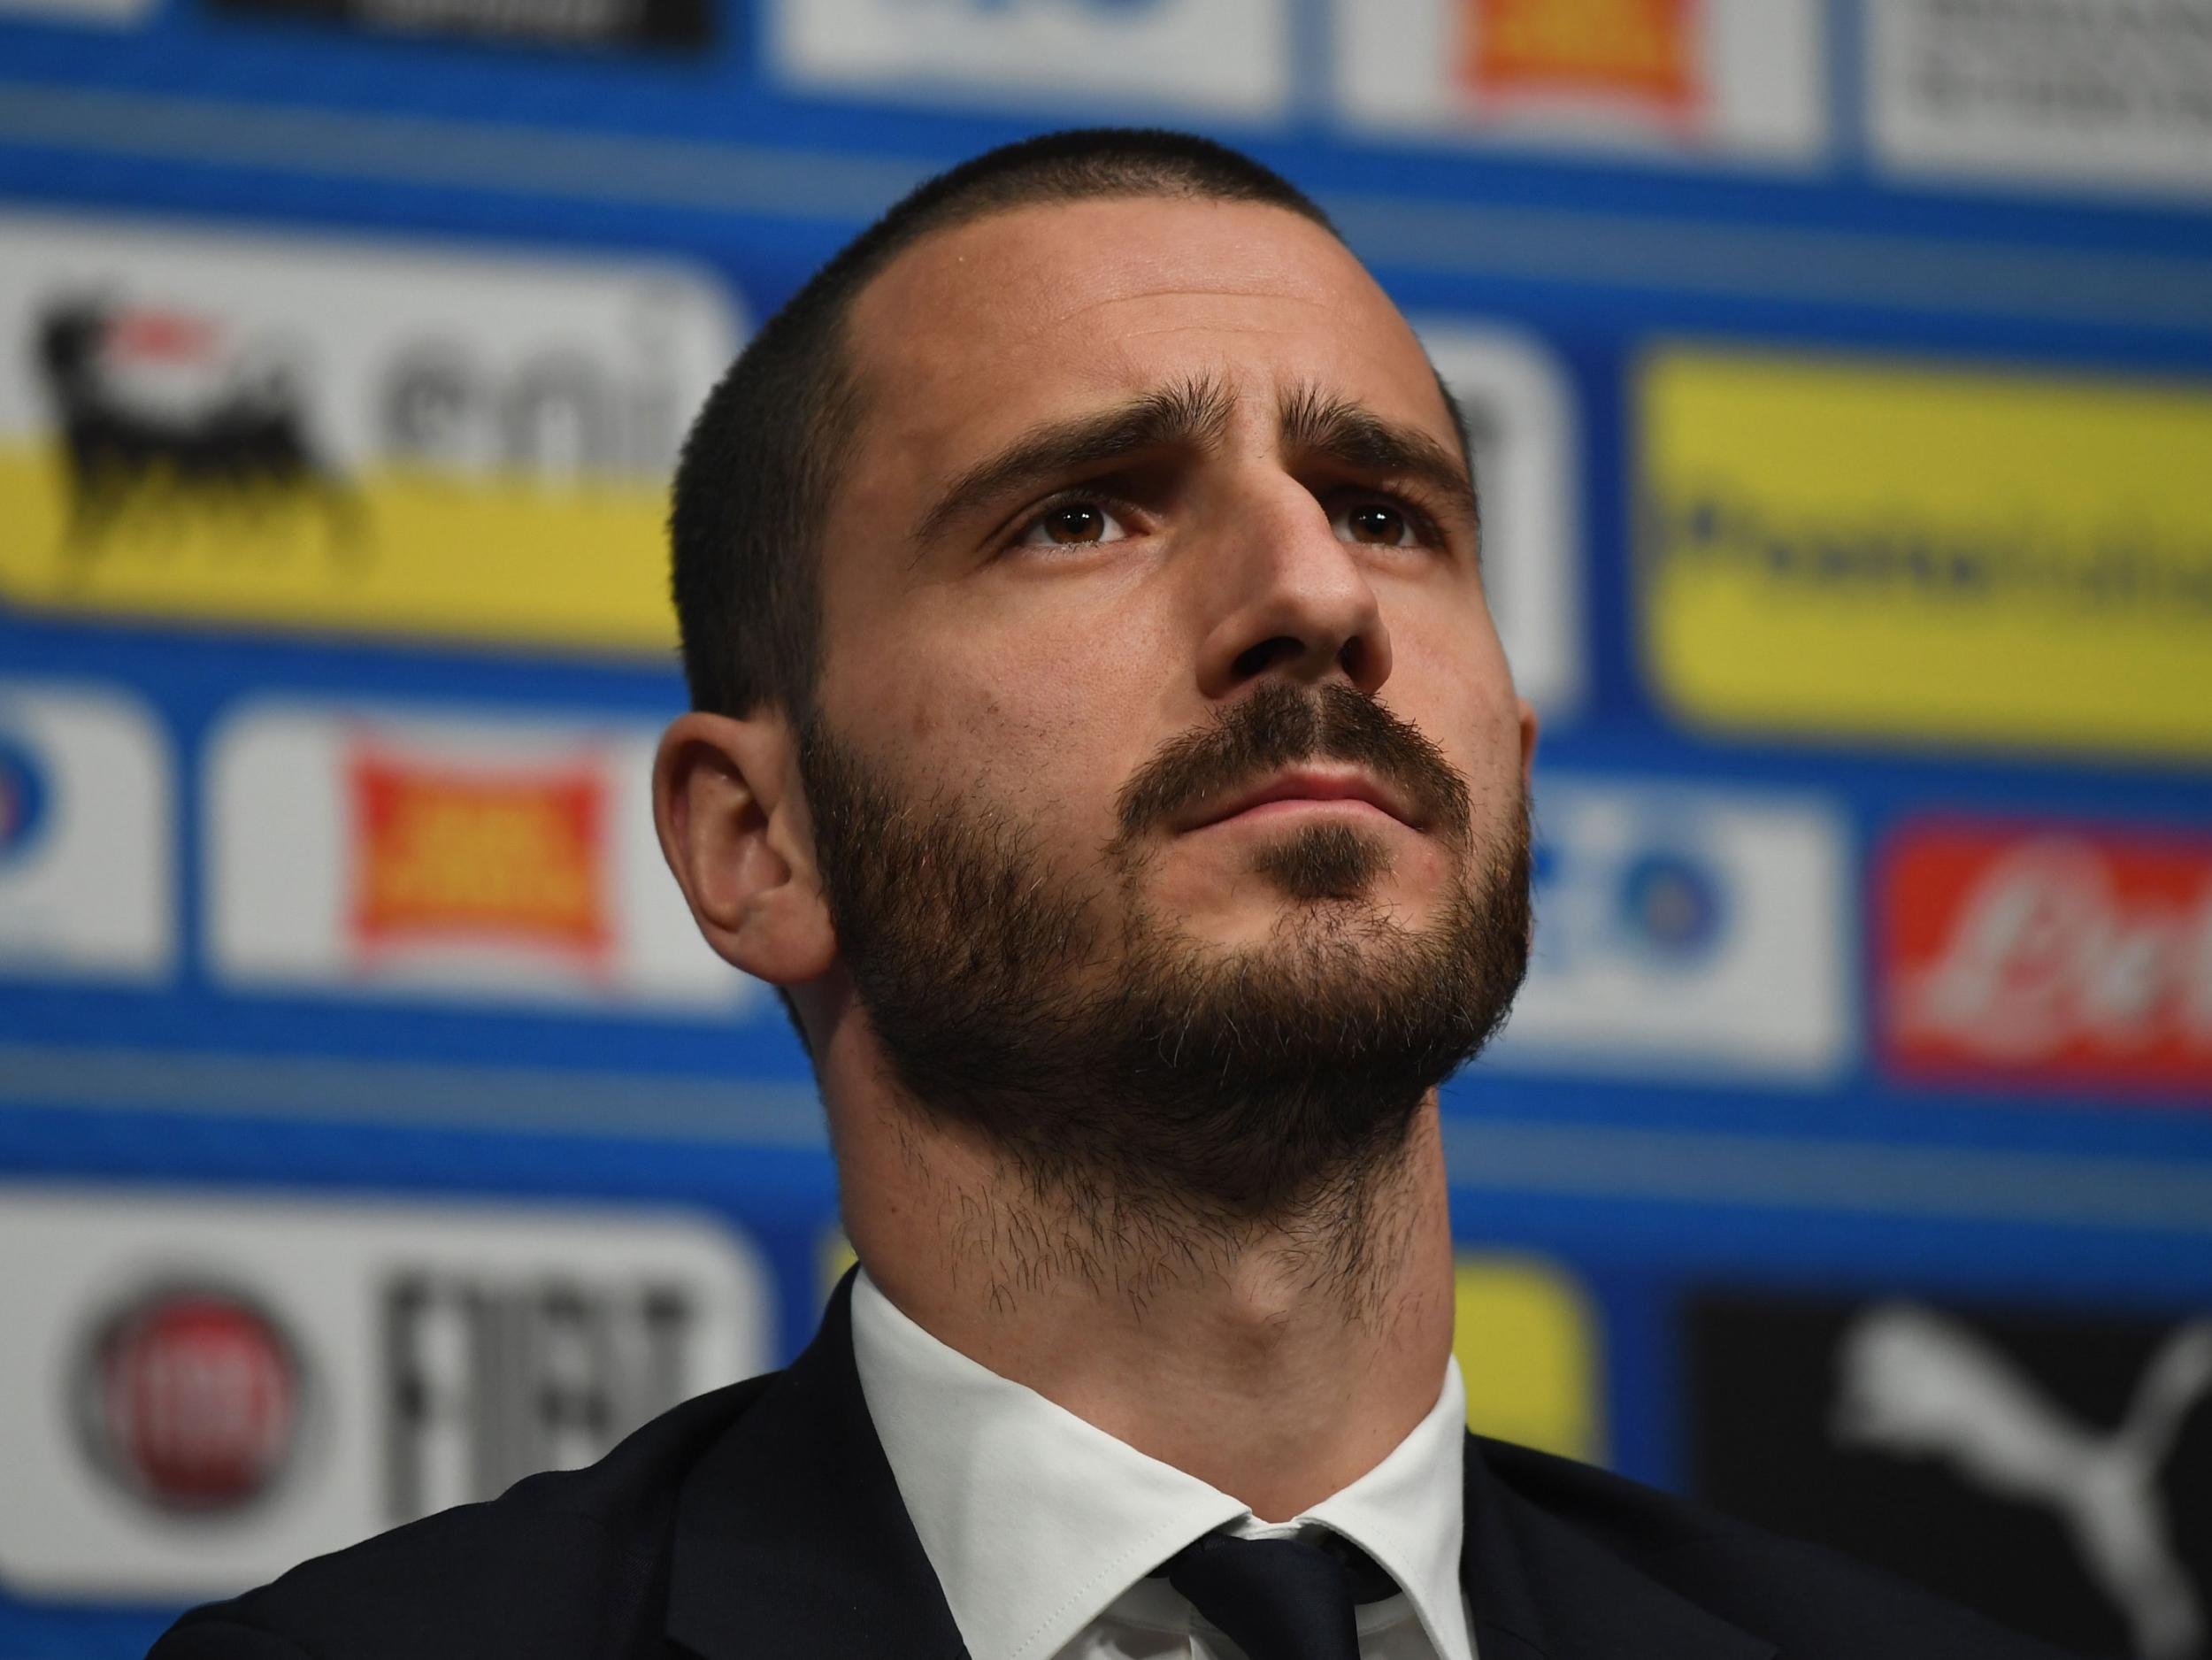 Bonucci will line up against England at Wembley